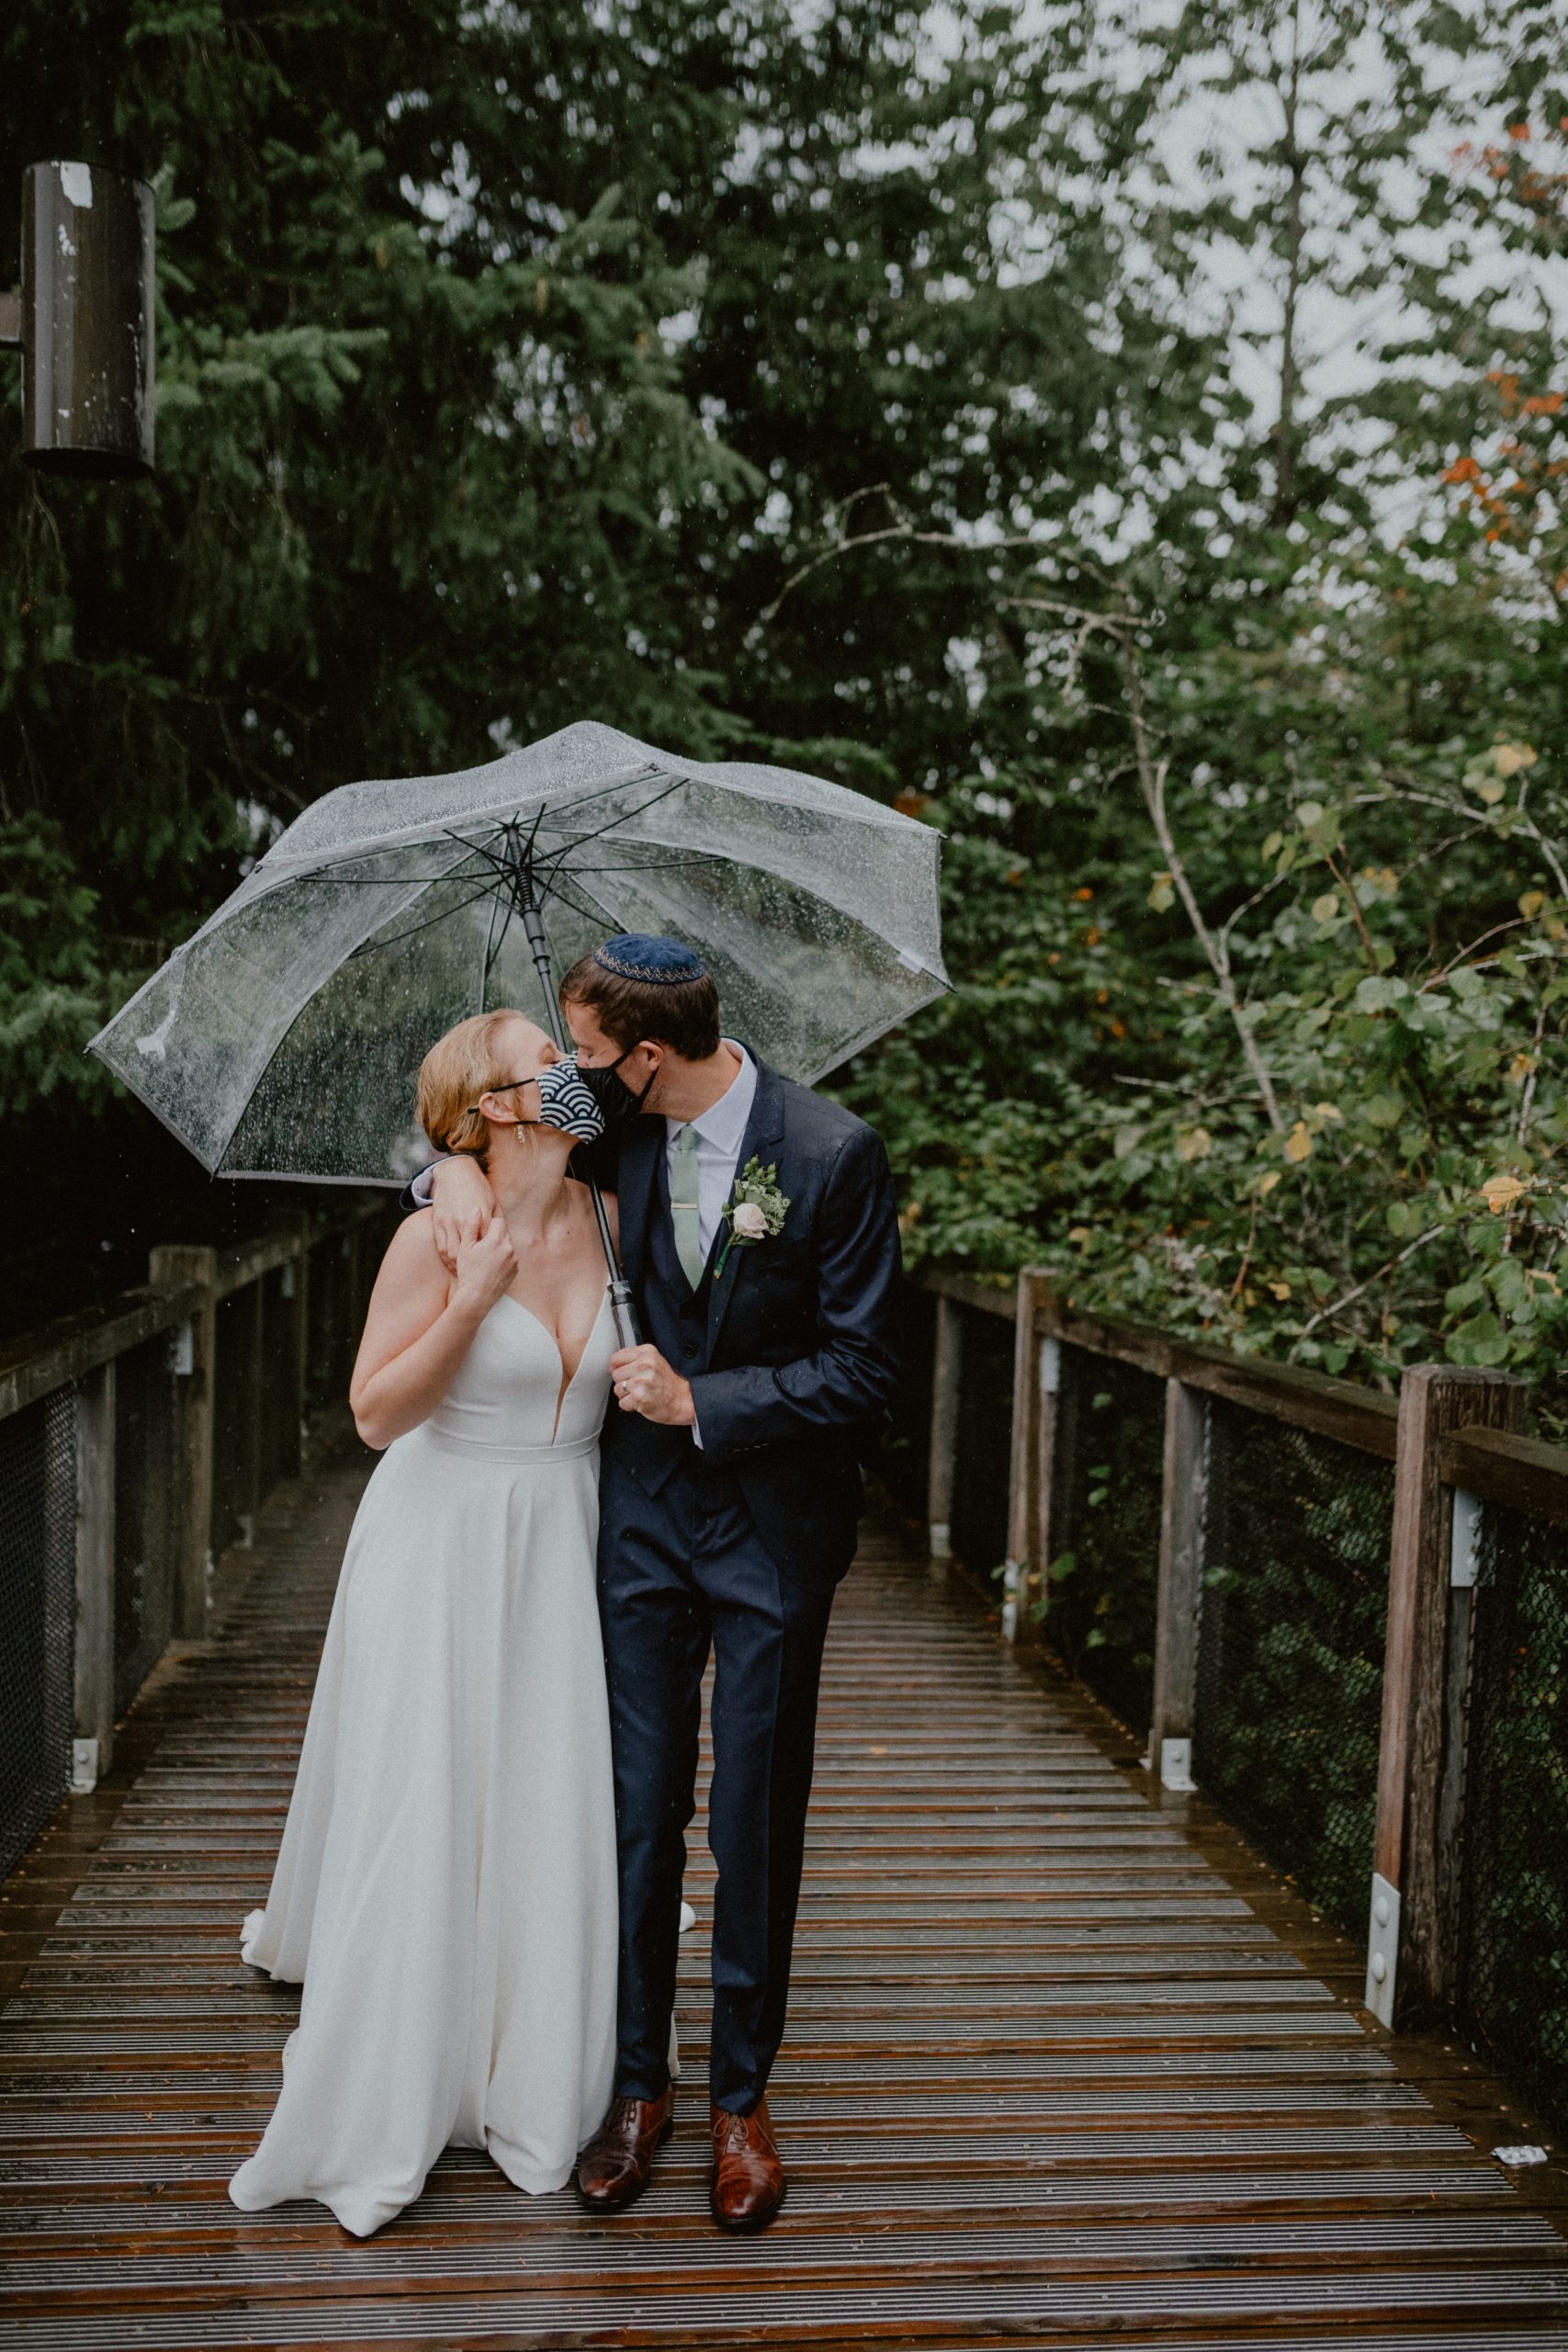 Bride and groom kiss at outdoor PNW wedding reception under long bridal veil in the rain, newlywed photography inspiration Bride and groom kiss post wedding ceremony inspiration | Seattle Elopement, Washington Elopement Photographer, Washington Elopement and Wedding Inspiration, Seattle Elopement ideas, PNW Wedding Inspiration, Fall Rainy PNW Wedding Ideas, Fall Wedding Inspiration, PNW Outdoor Wedding Ideas | chelseaabril.com